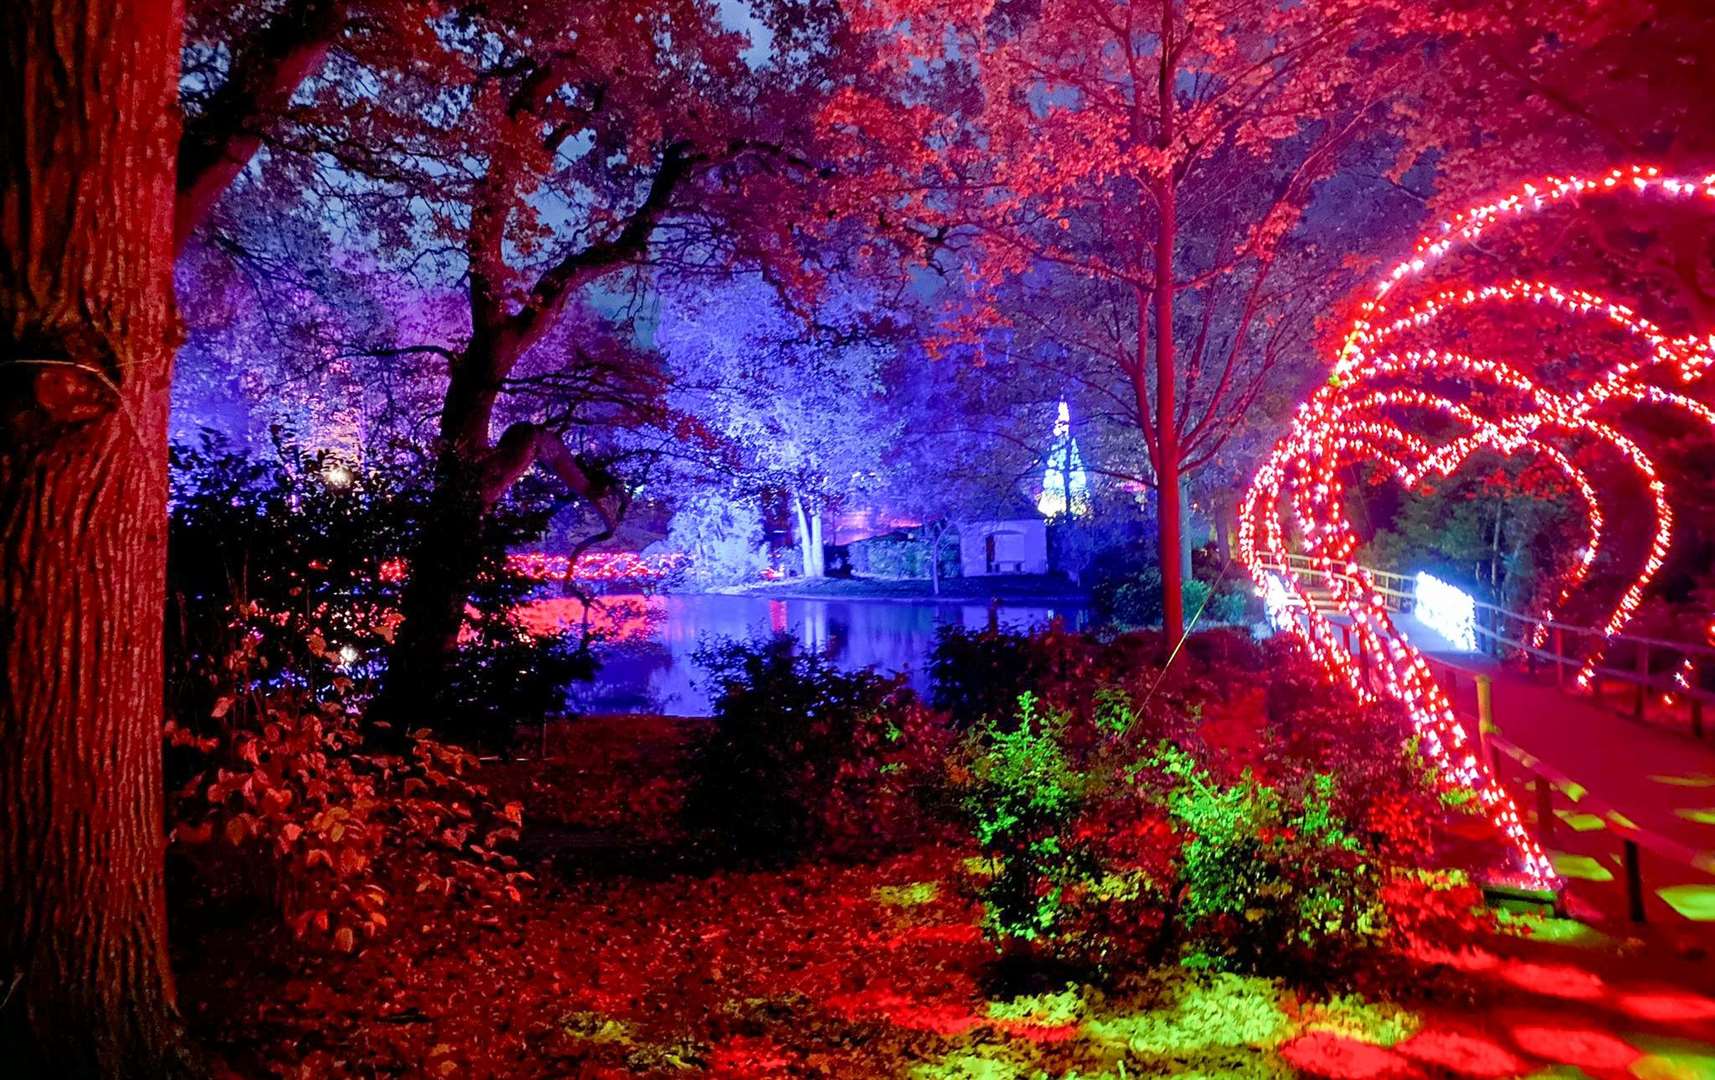 The attraction is similar to the Christmas at Bedgebury light trail, organised by the same team